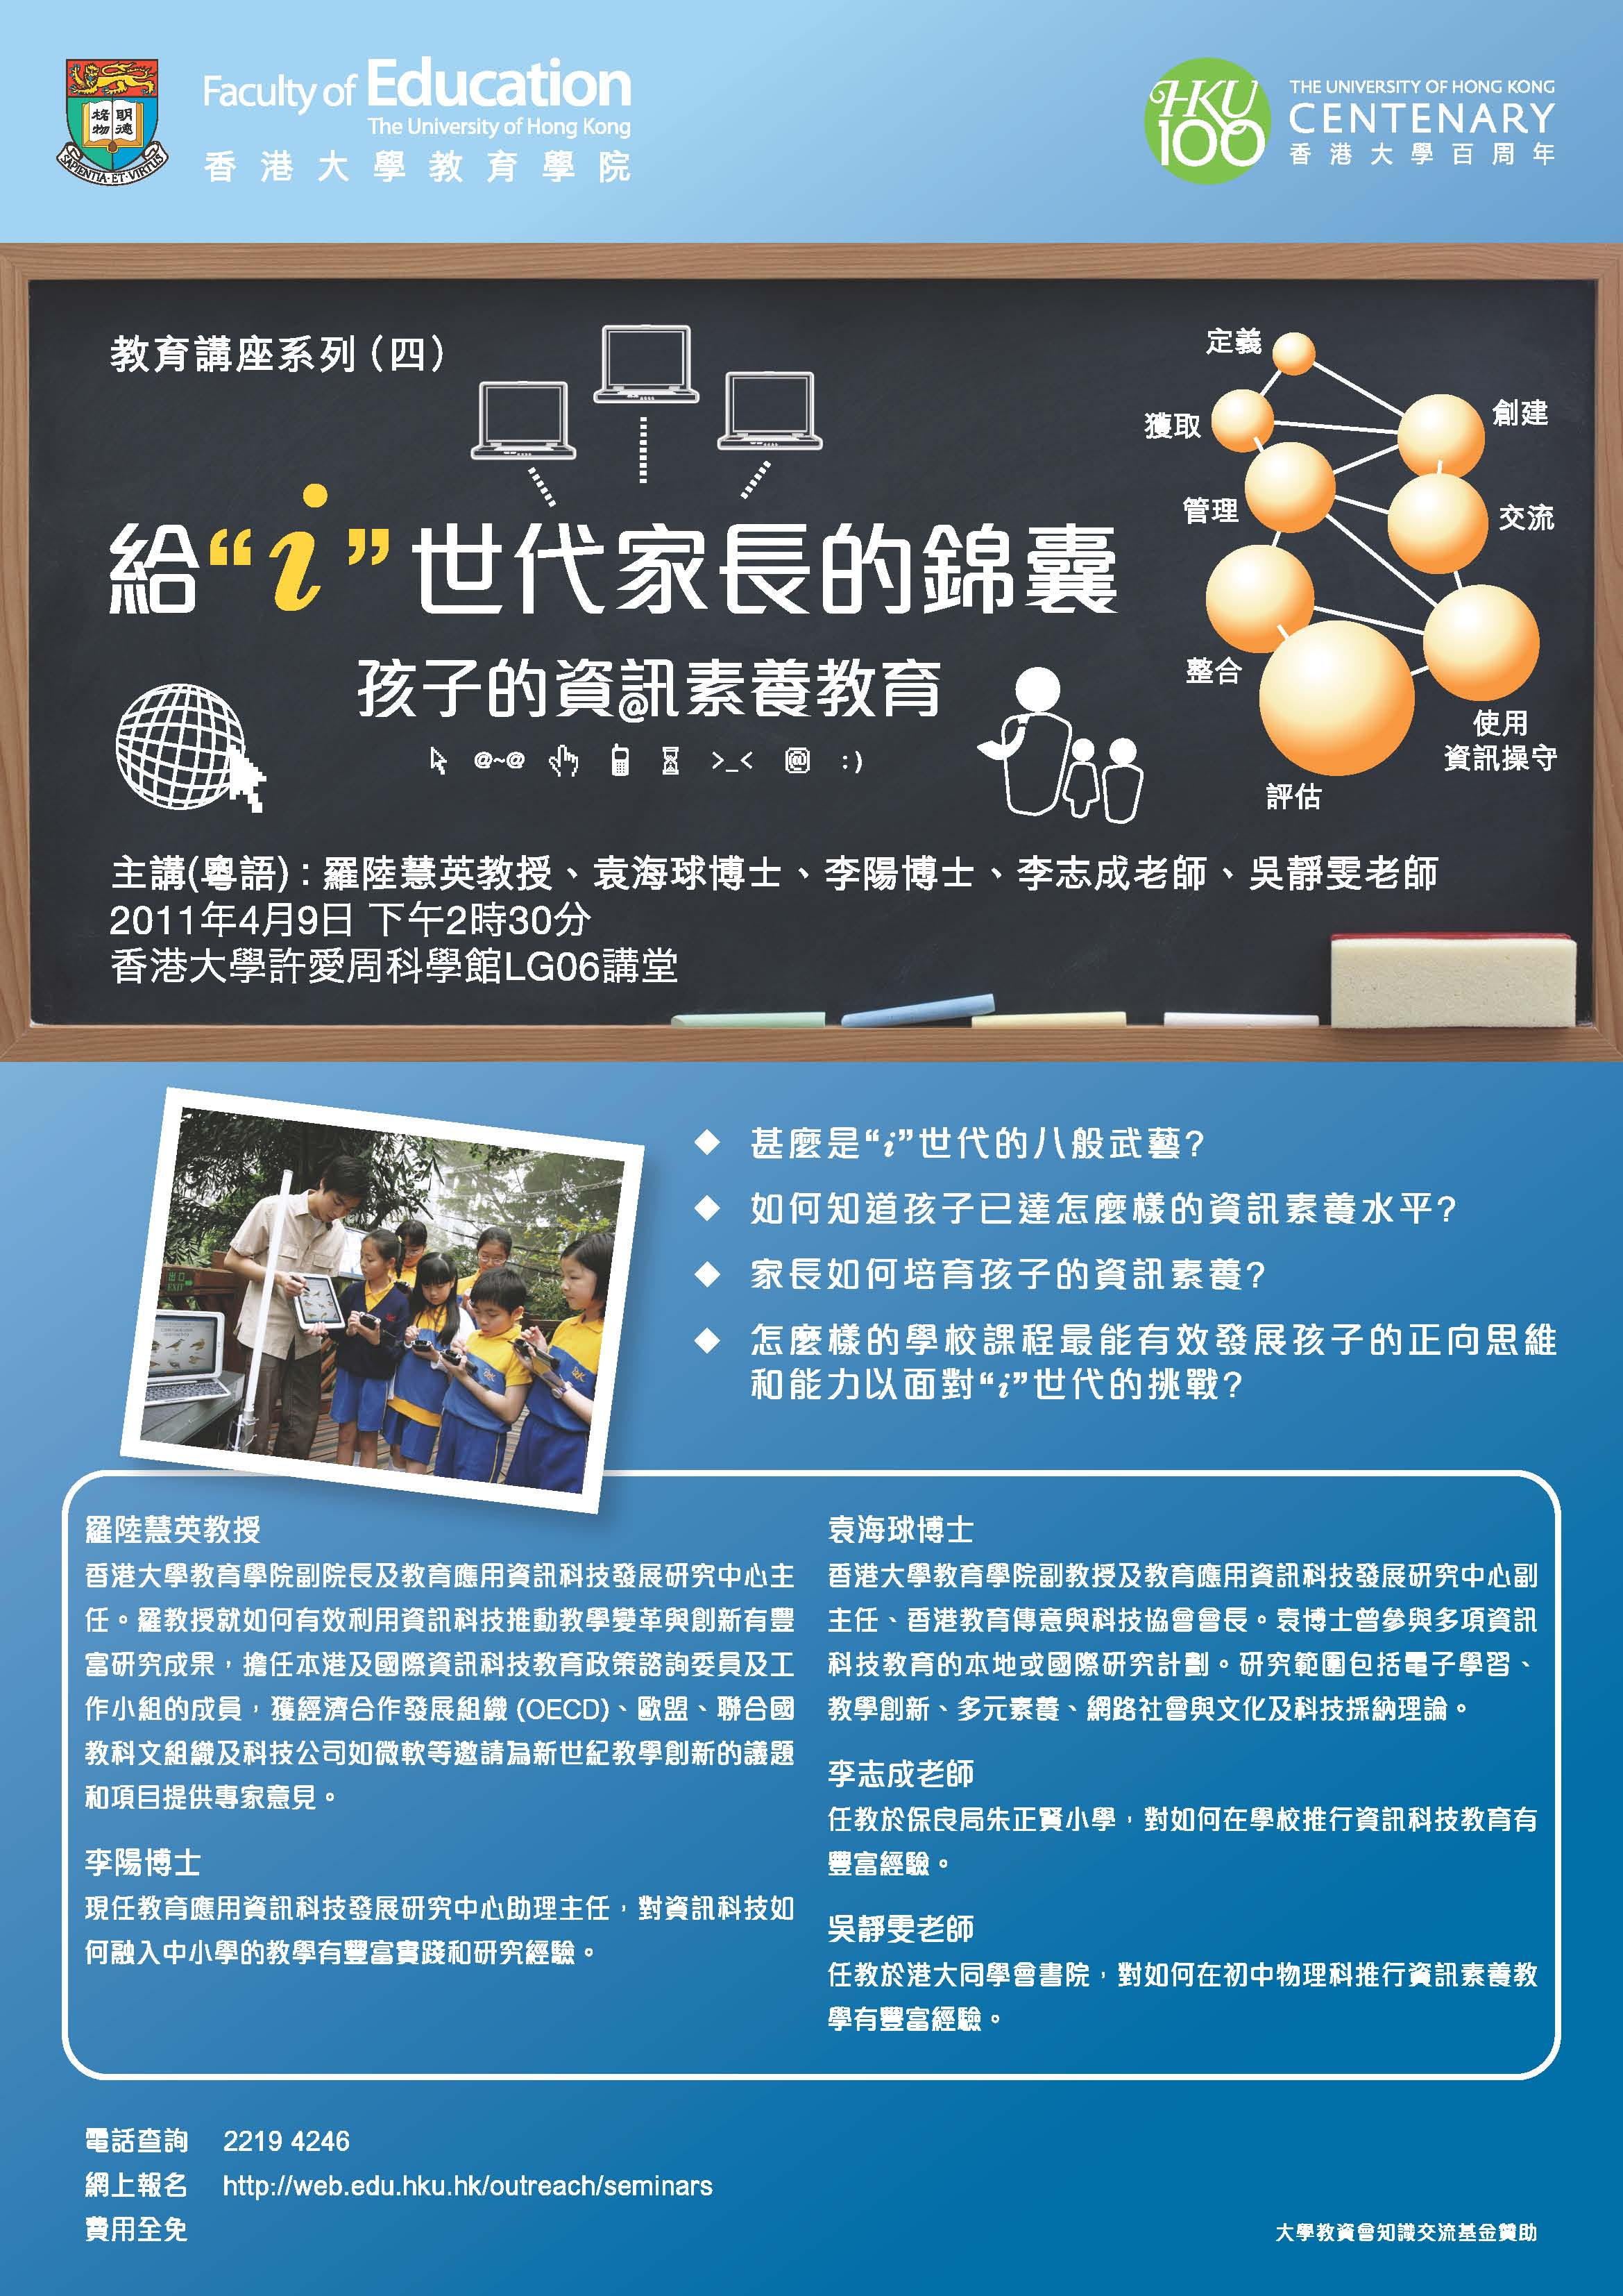 HKU Education Seminar Series (4) by Professor Nancy Law, Dr Allan Yuen and Dr Lee Yeung